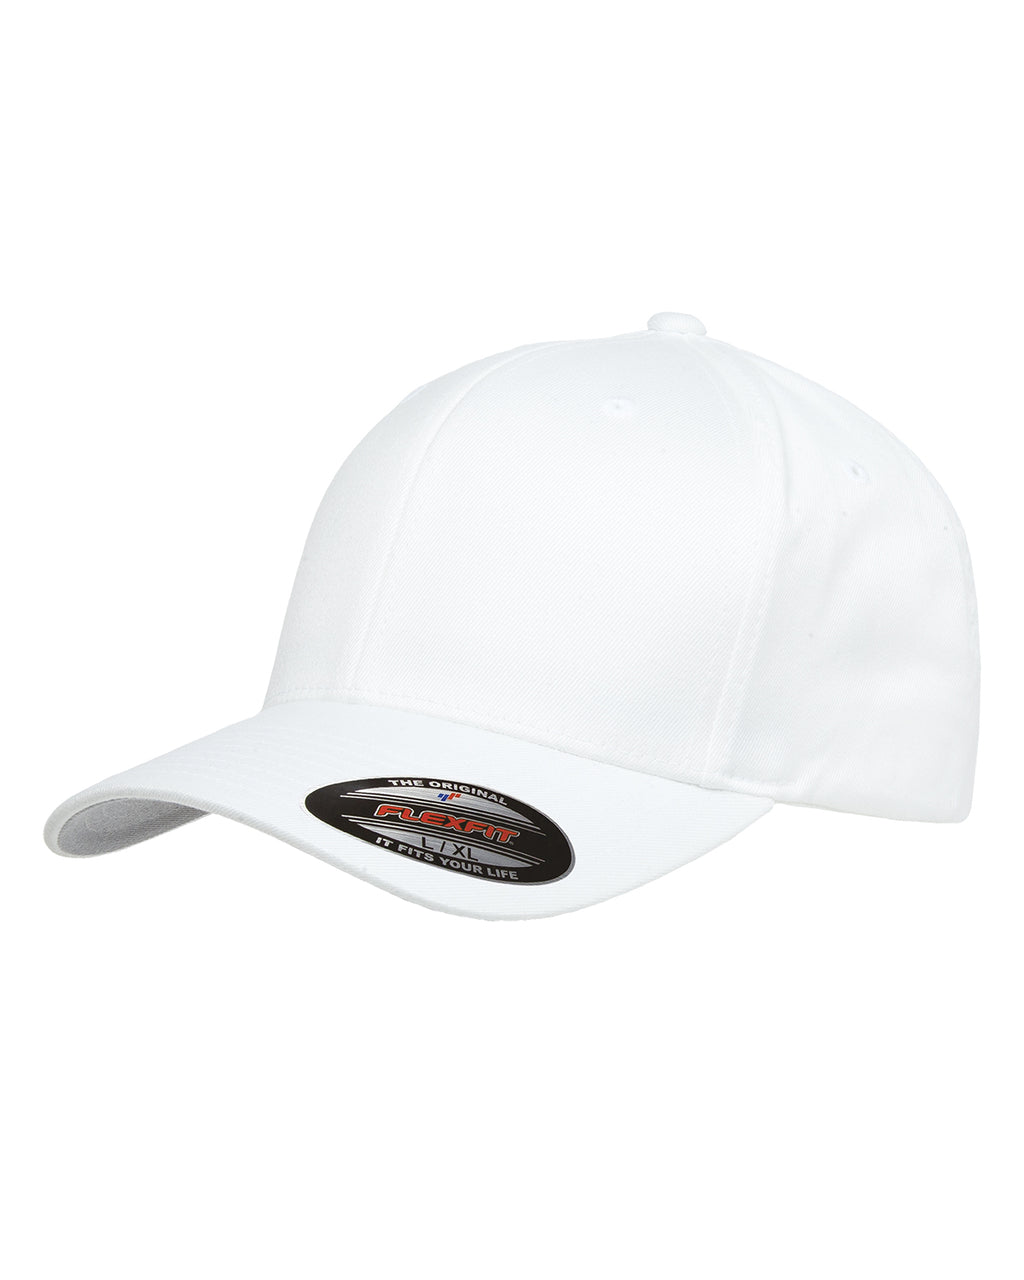 EMS Star of Life Flexfit & Firefighter Hat Accessories - Clothing